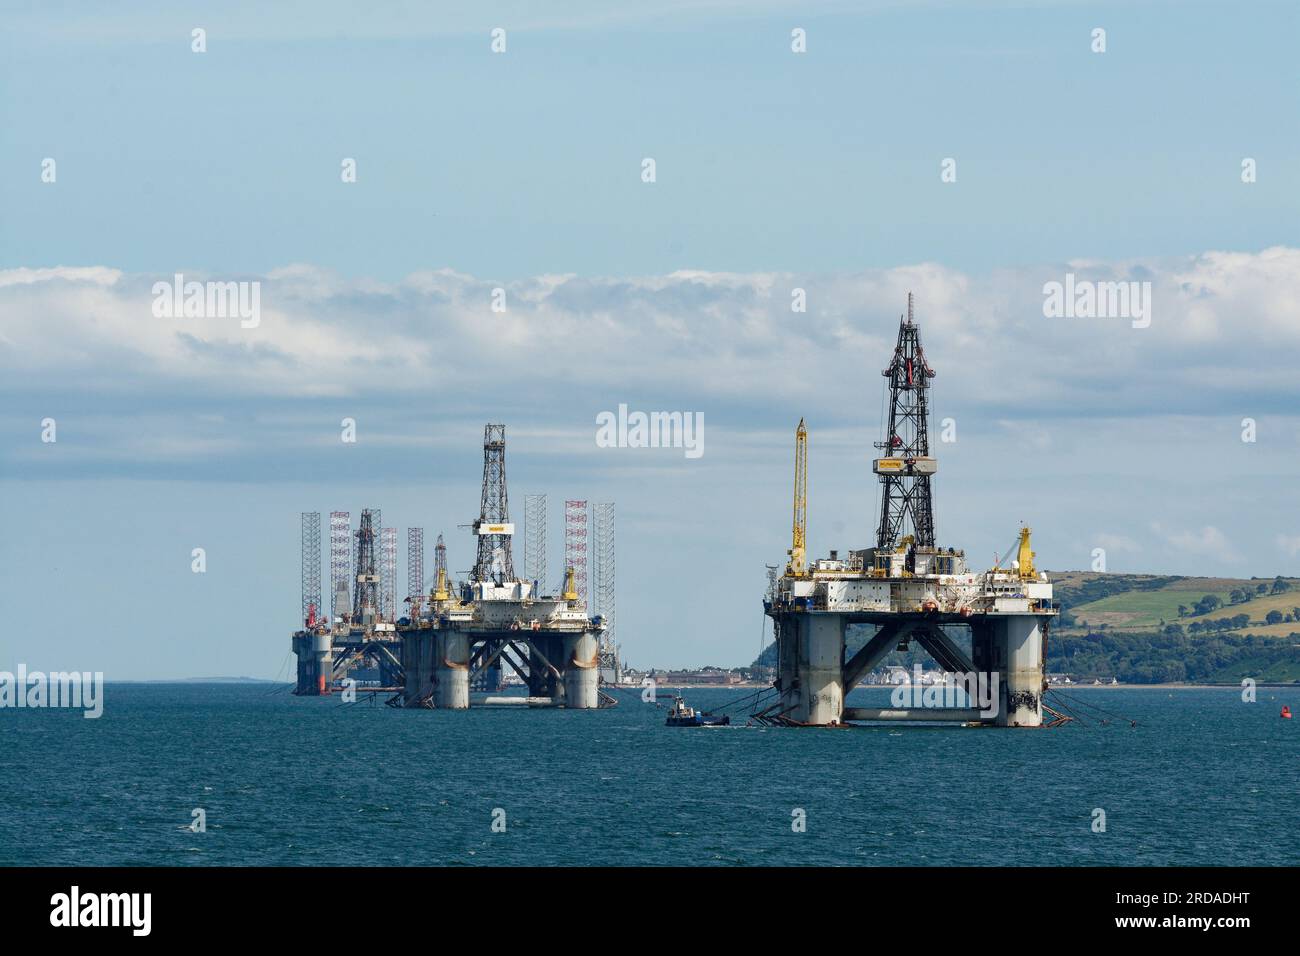 Oil Rigs waiting in Cromarty Firth off Invergordon. Calm seas and blue skies. Stock Photo